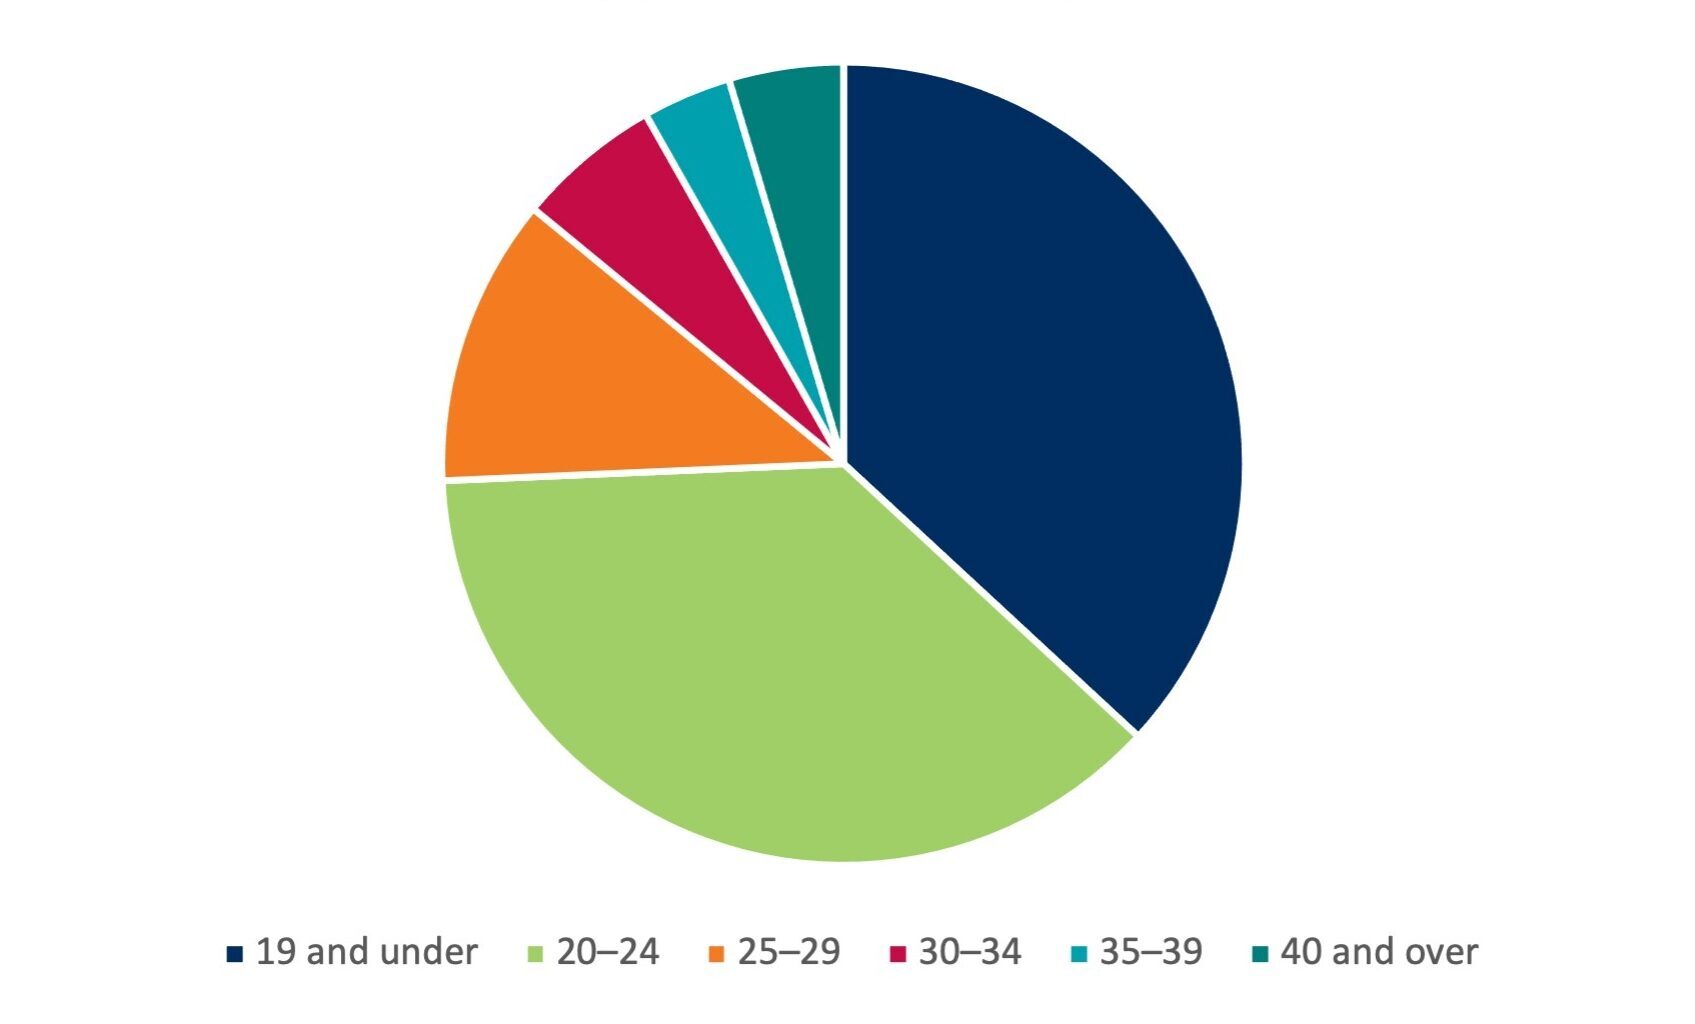 UAC applicants analysed by age